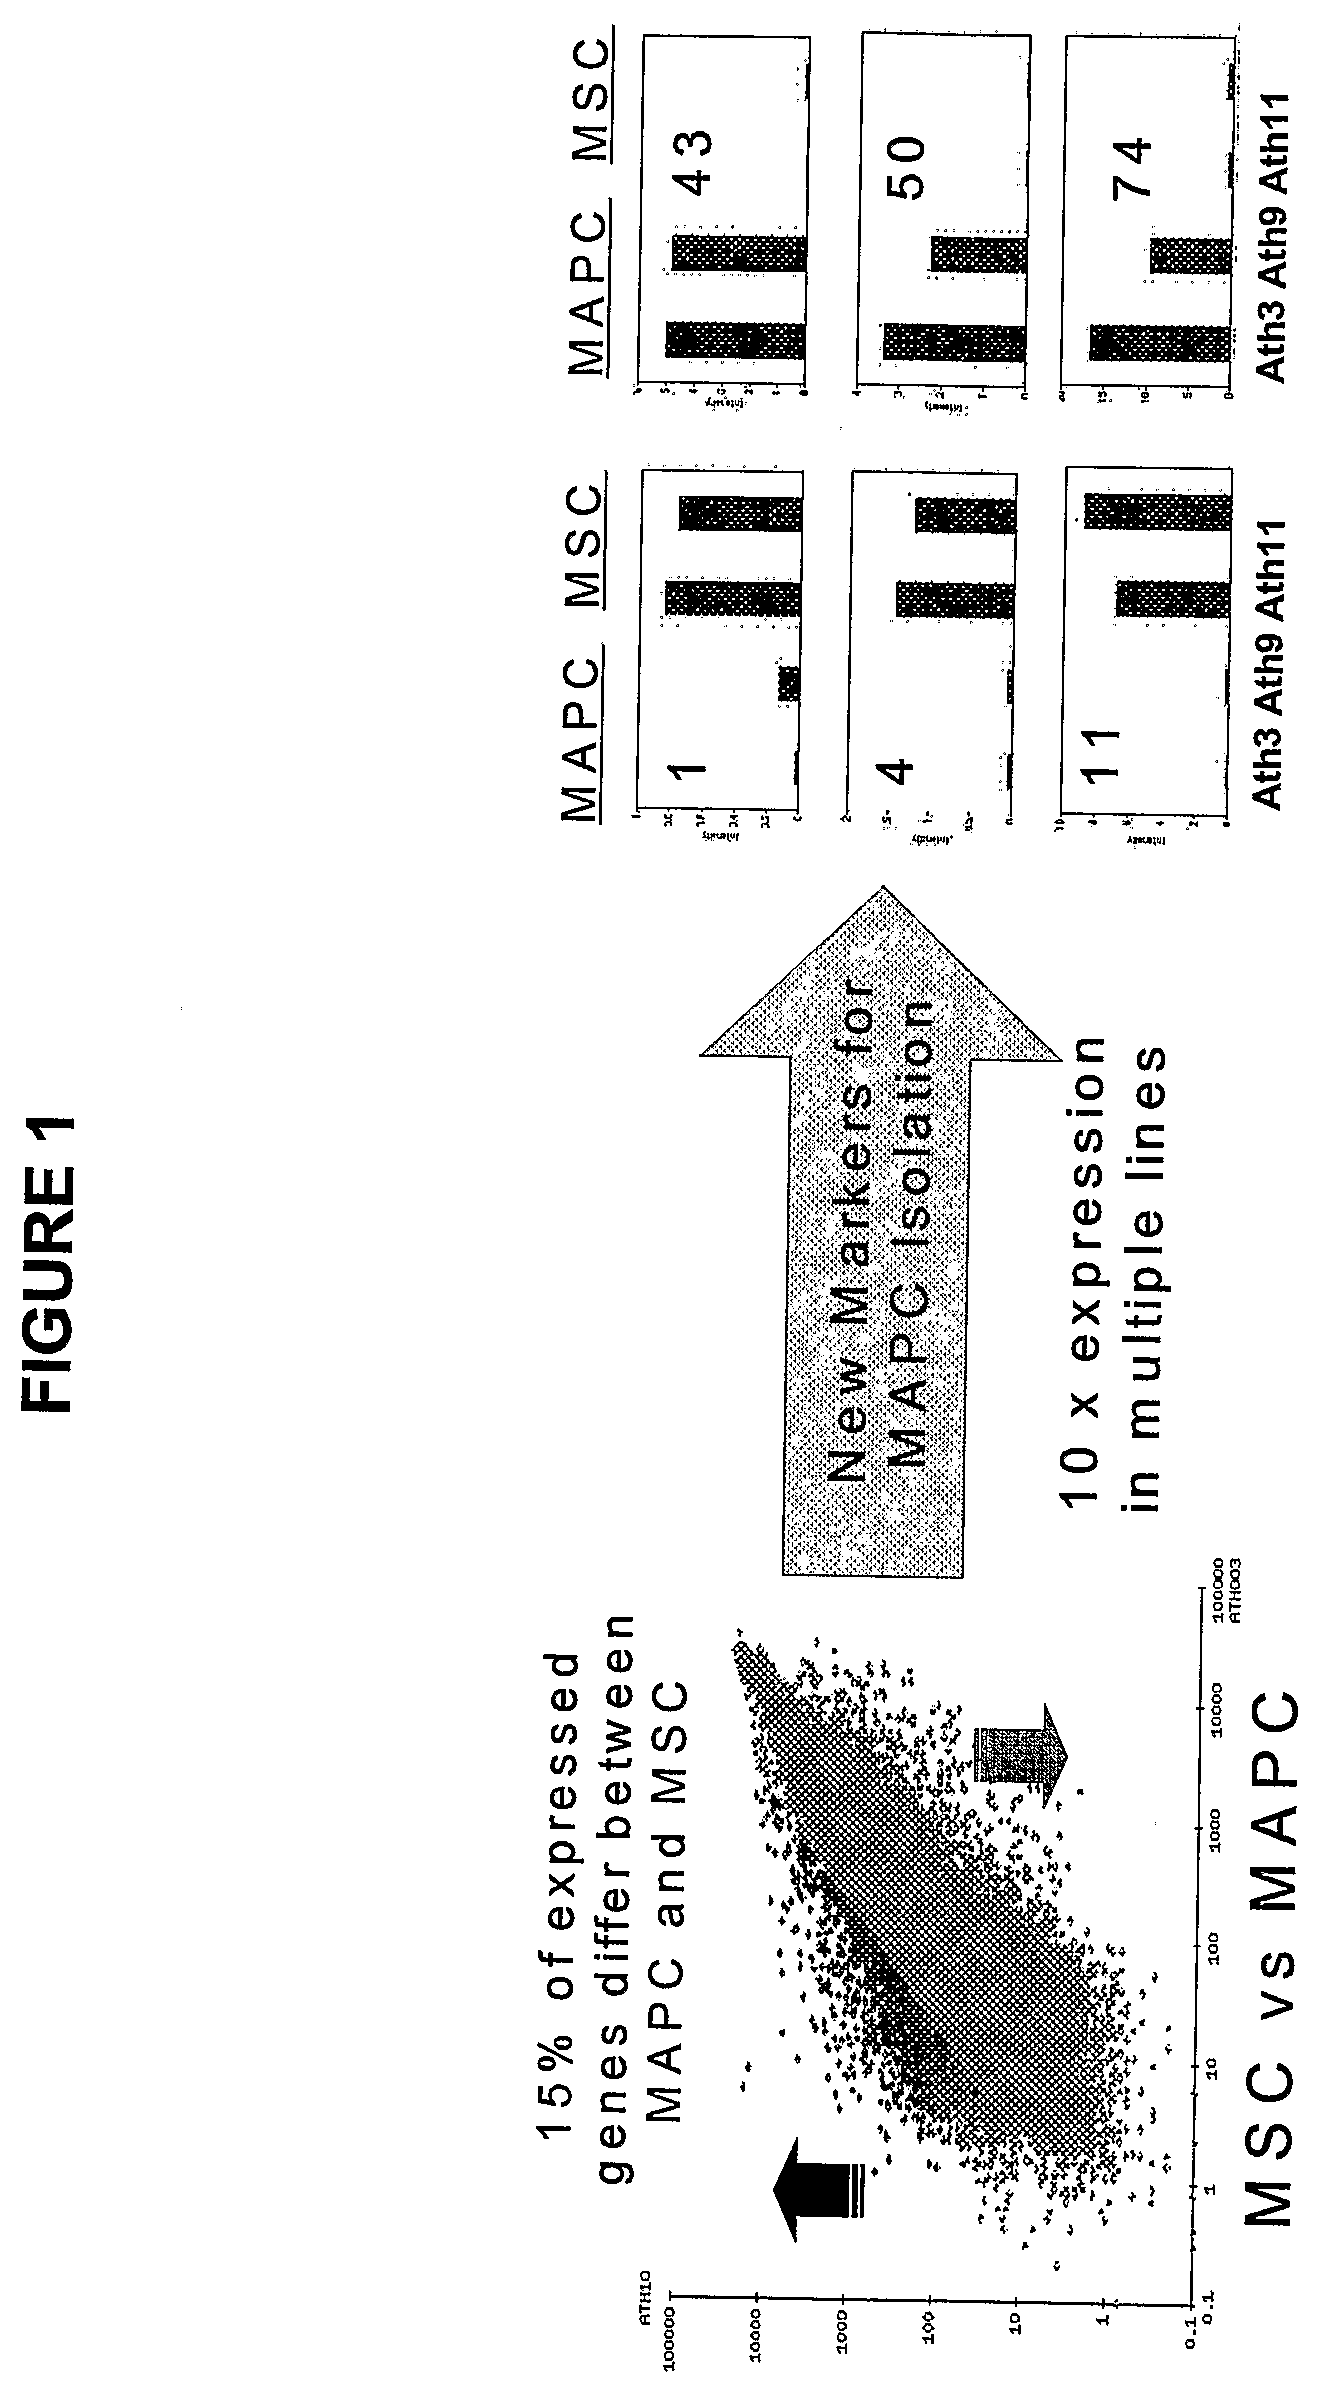 Immunomodulatory Properties of Multipotent Adult Progenitor Cells and Uses Thereof